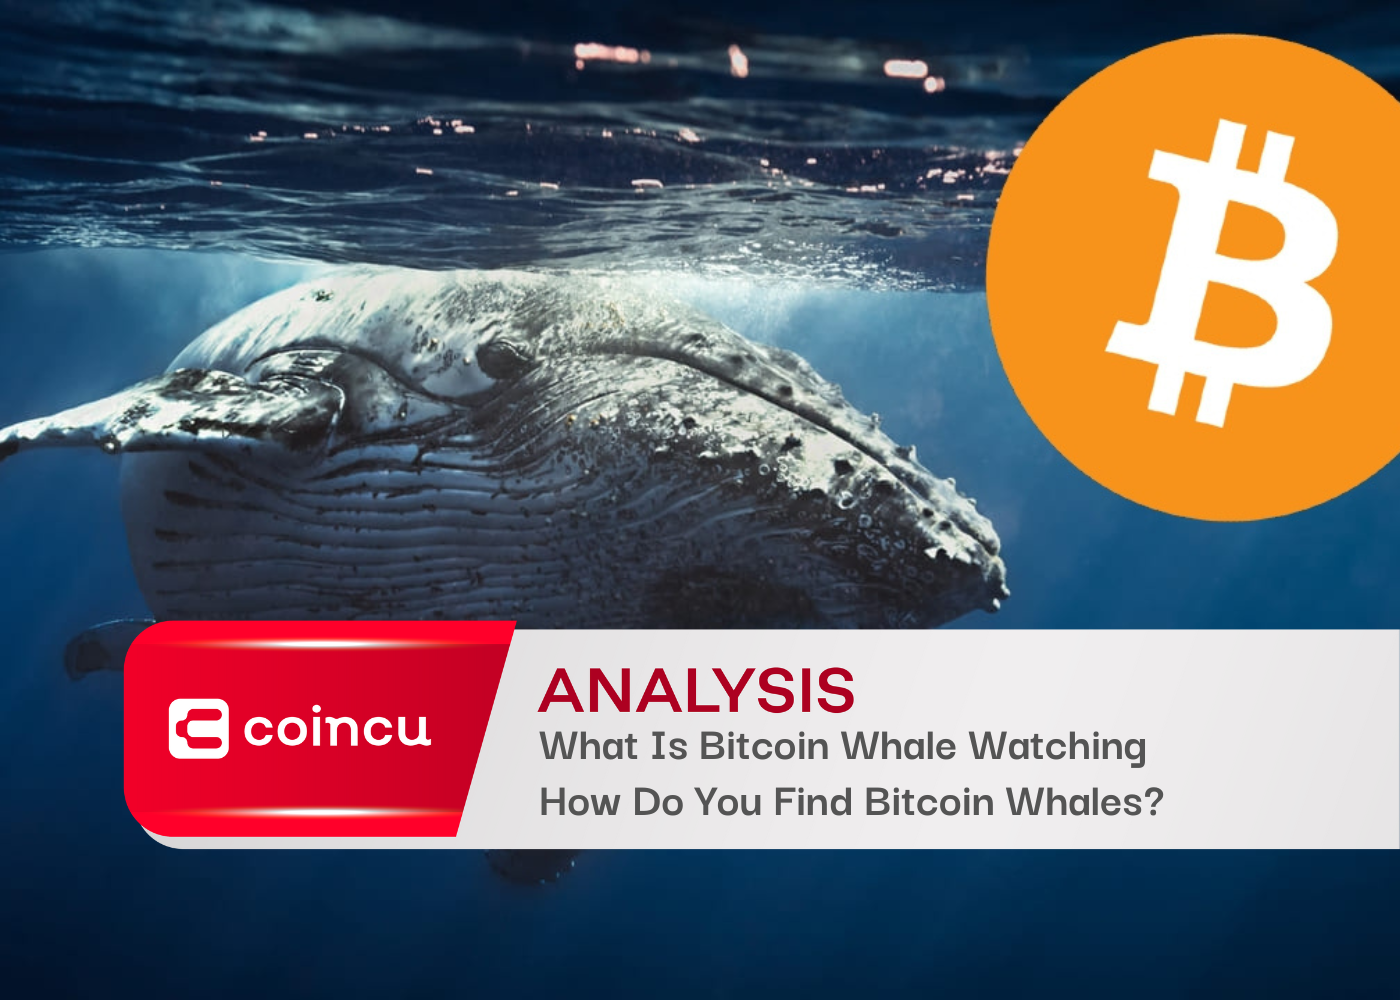 What Is Bitcoin Whale Watching